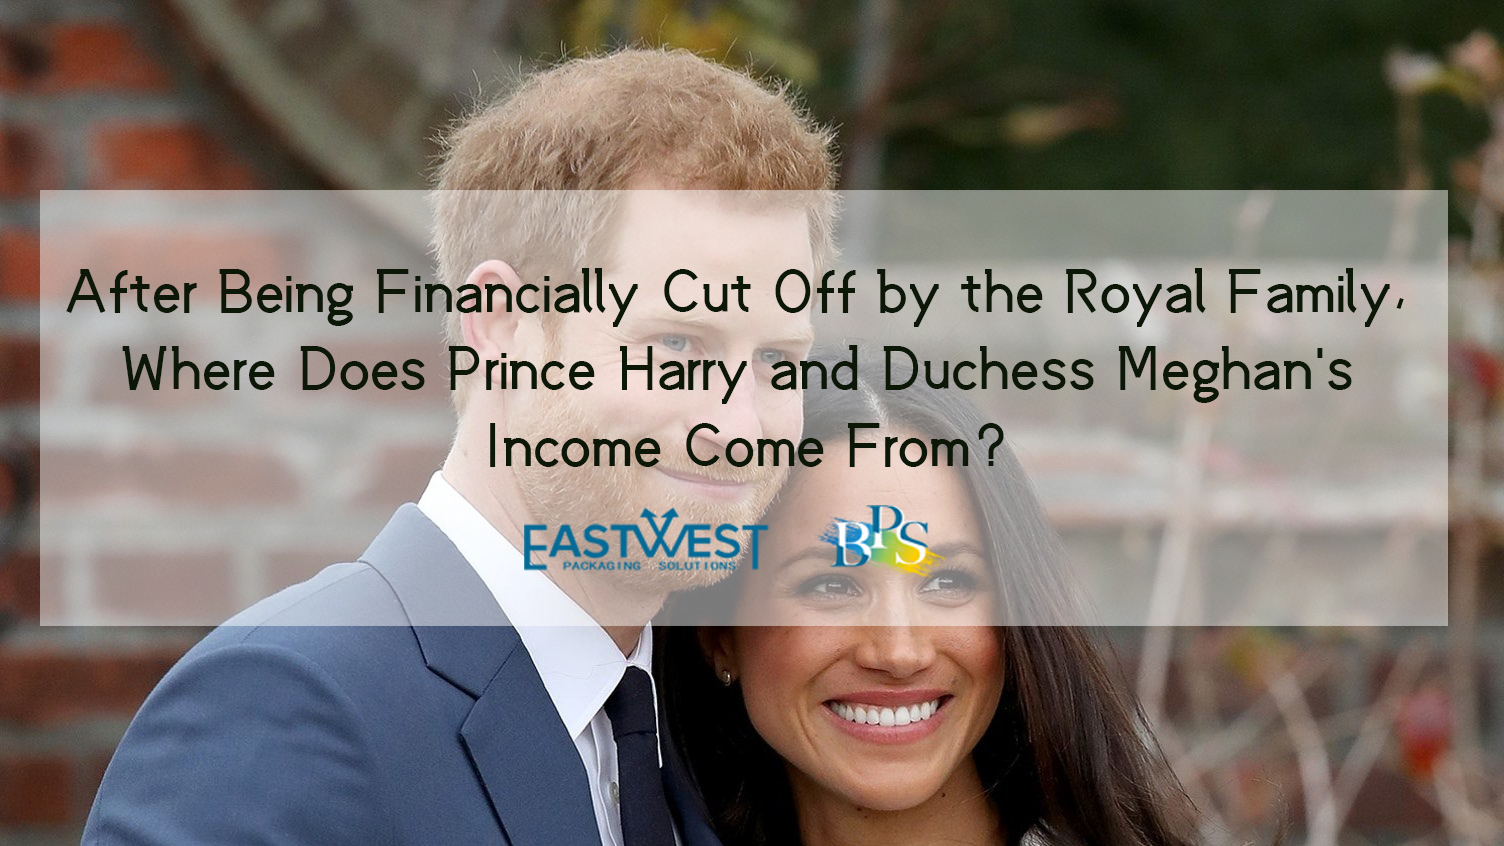 After Being Financially Cut Off by the Royal Family, Where Does Harry and Duchess Meghan's Income Come From?